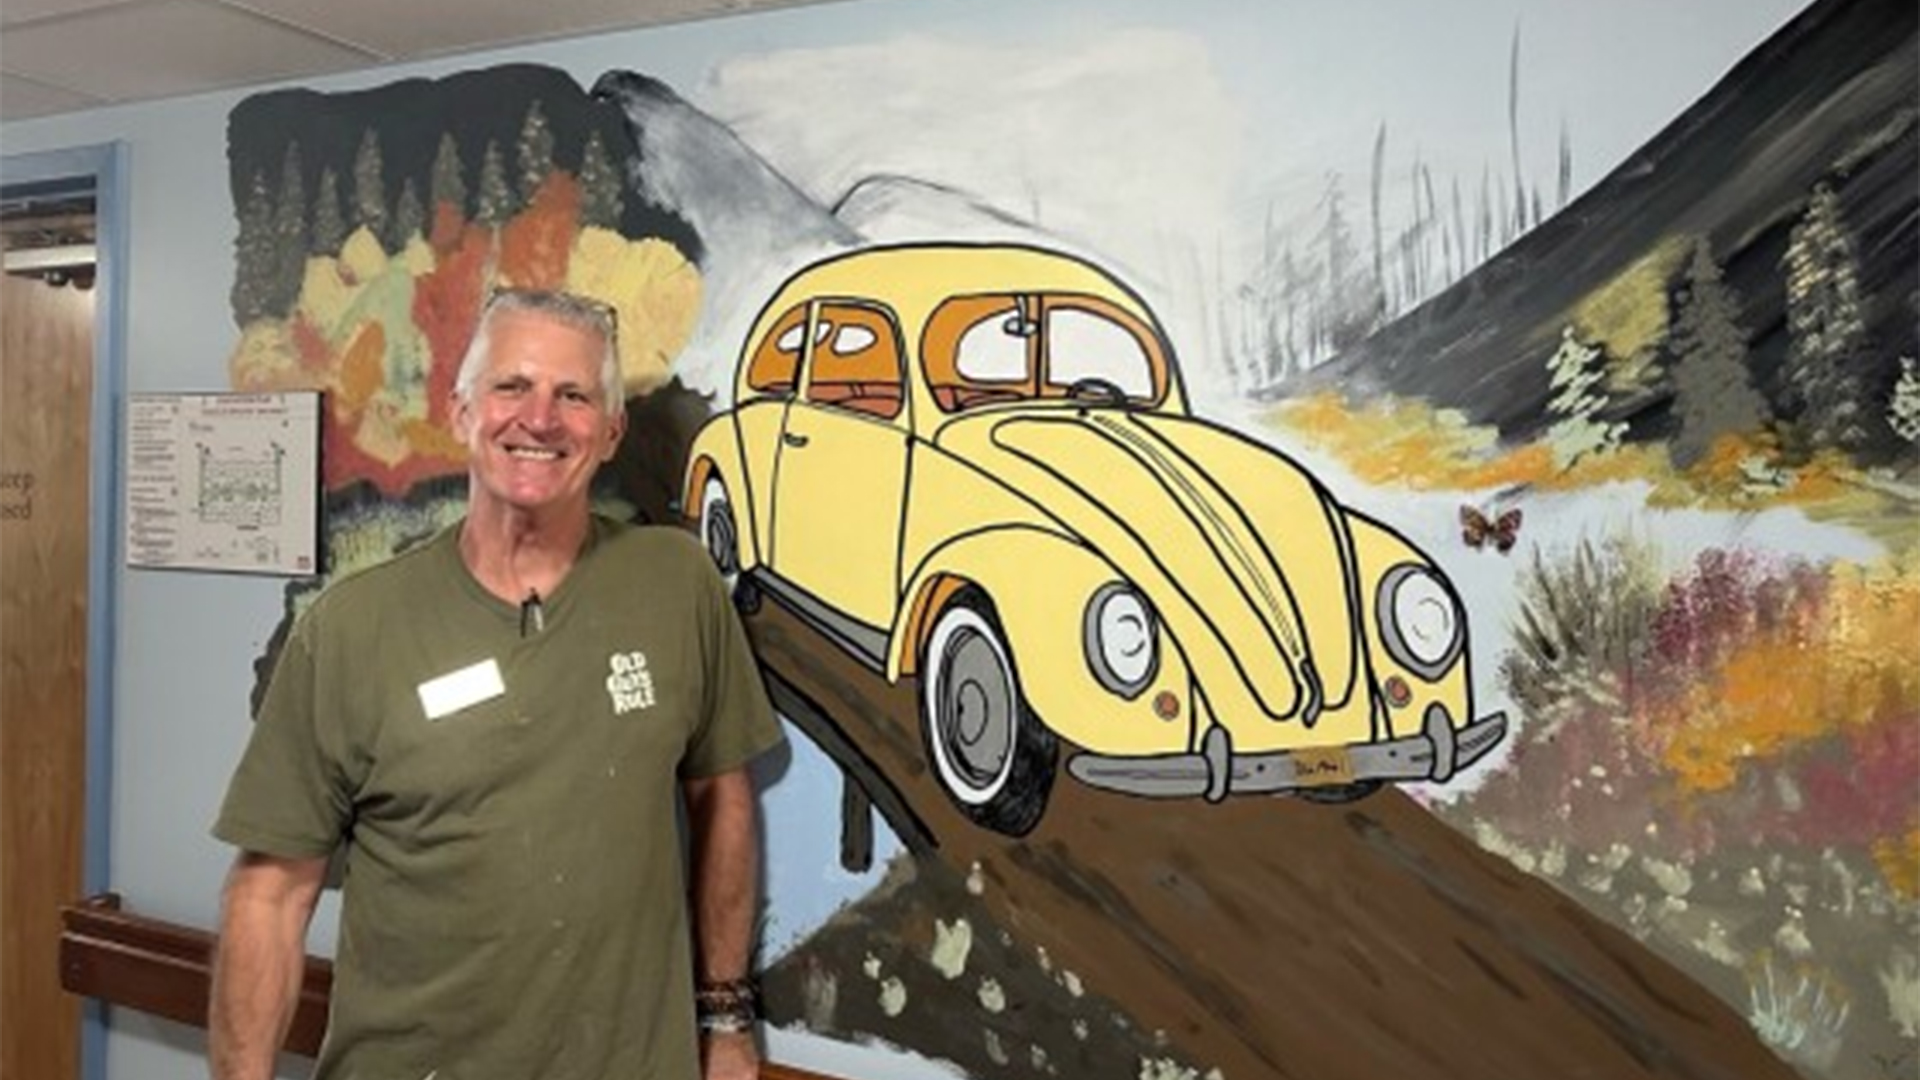 VW beetle mural with man standing in front of it